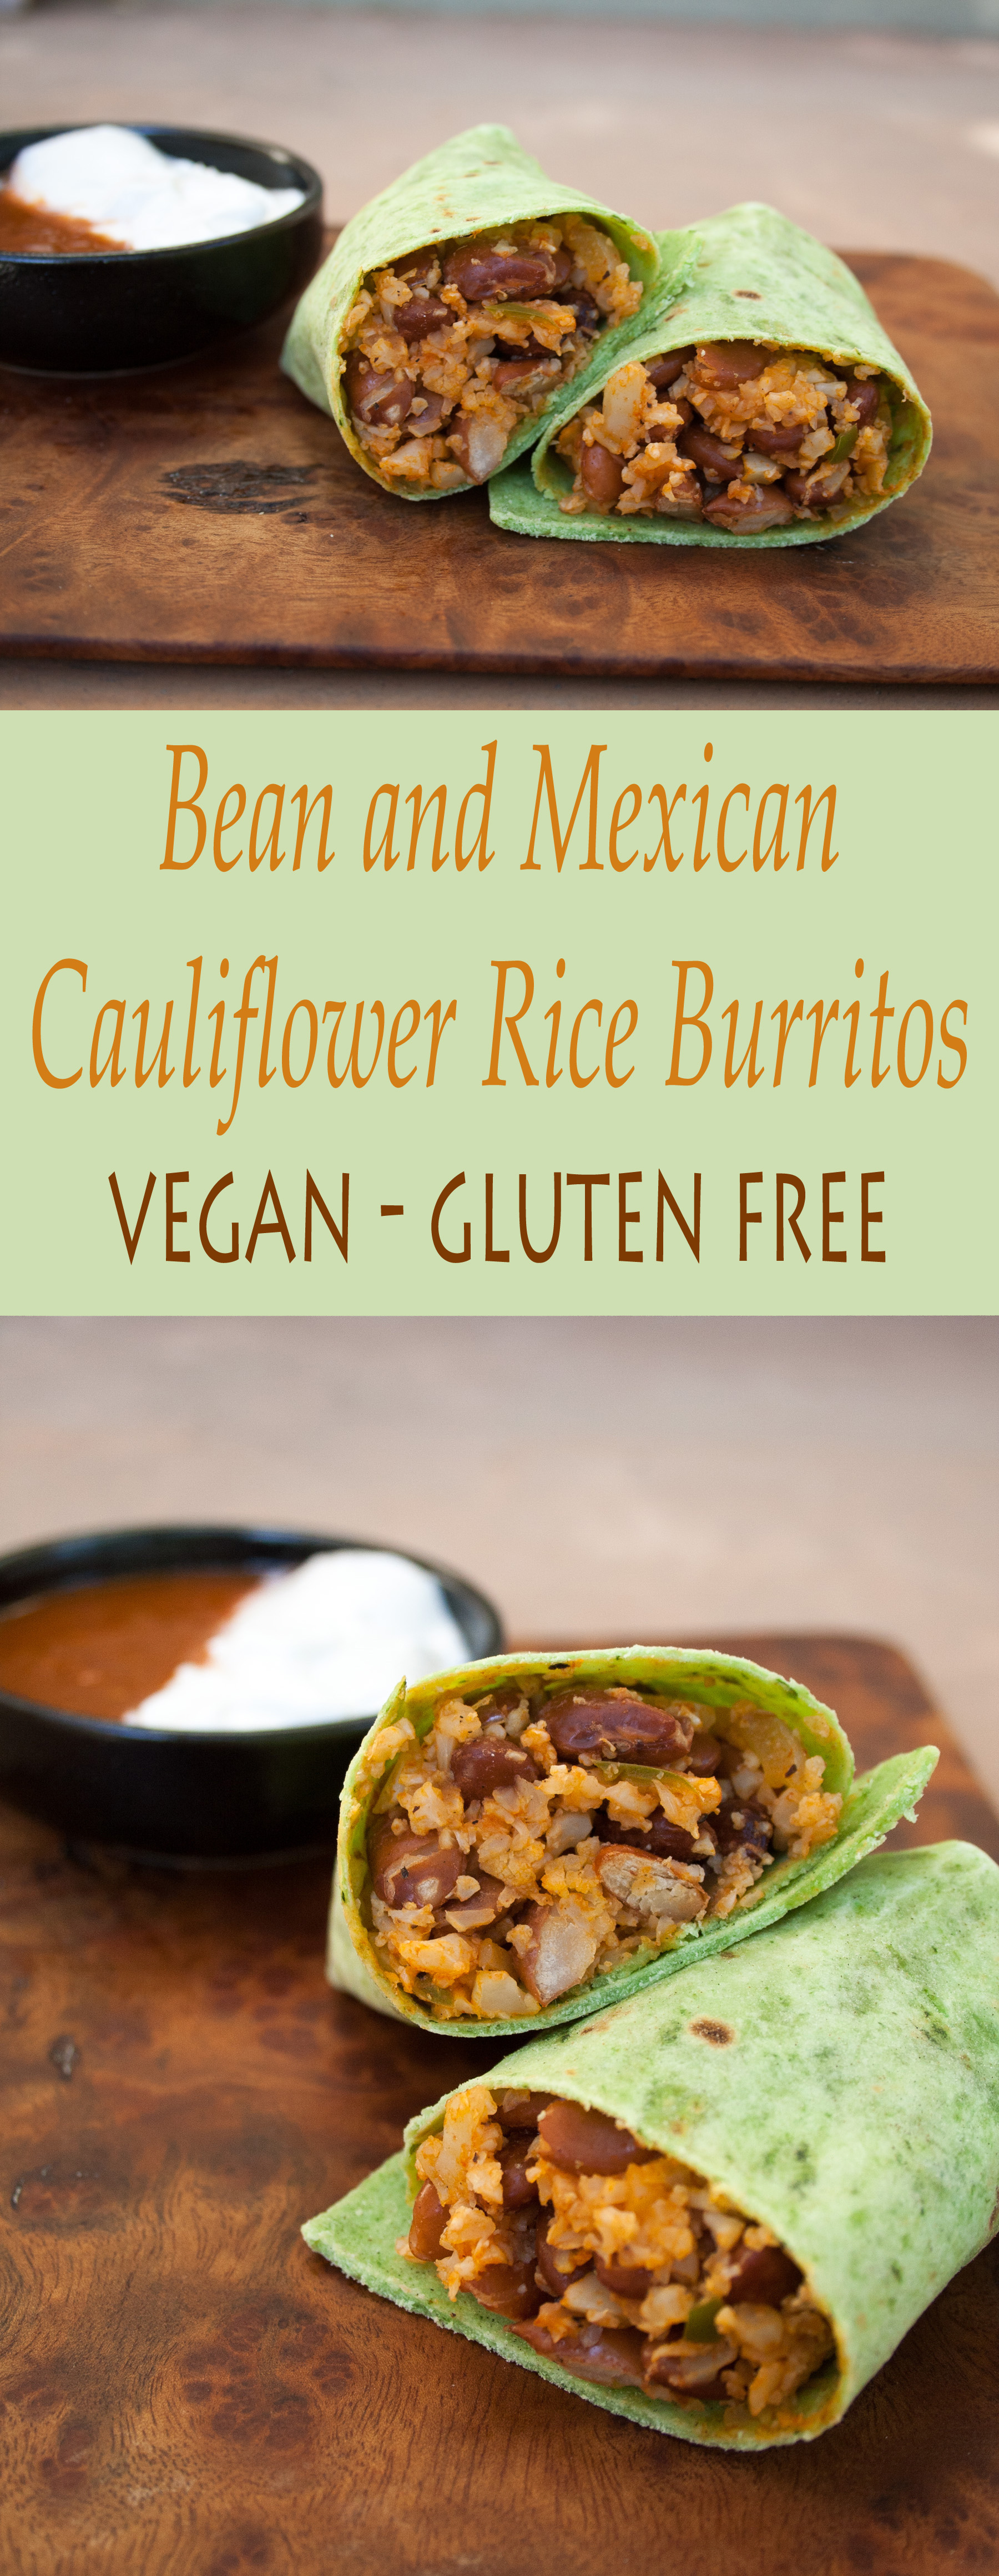 Bean and Mexican Cauliflower Rice Burritos collage photo with text.